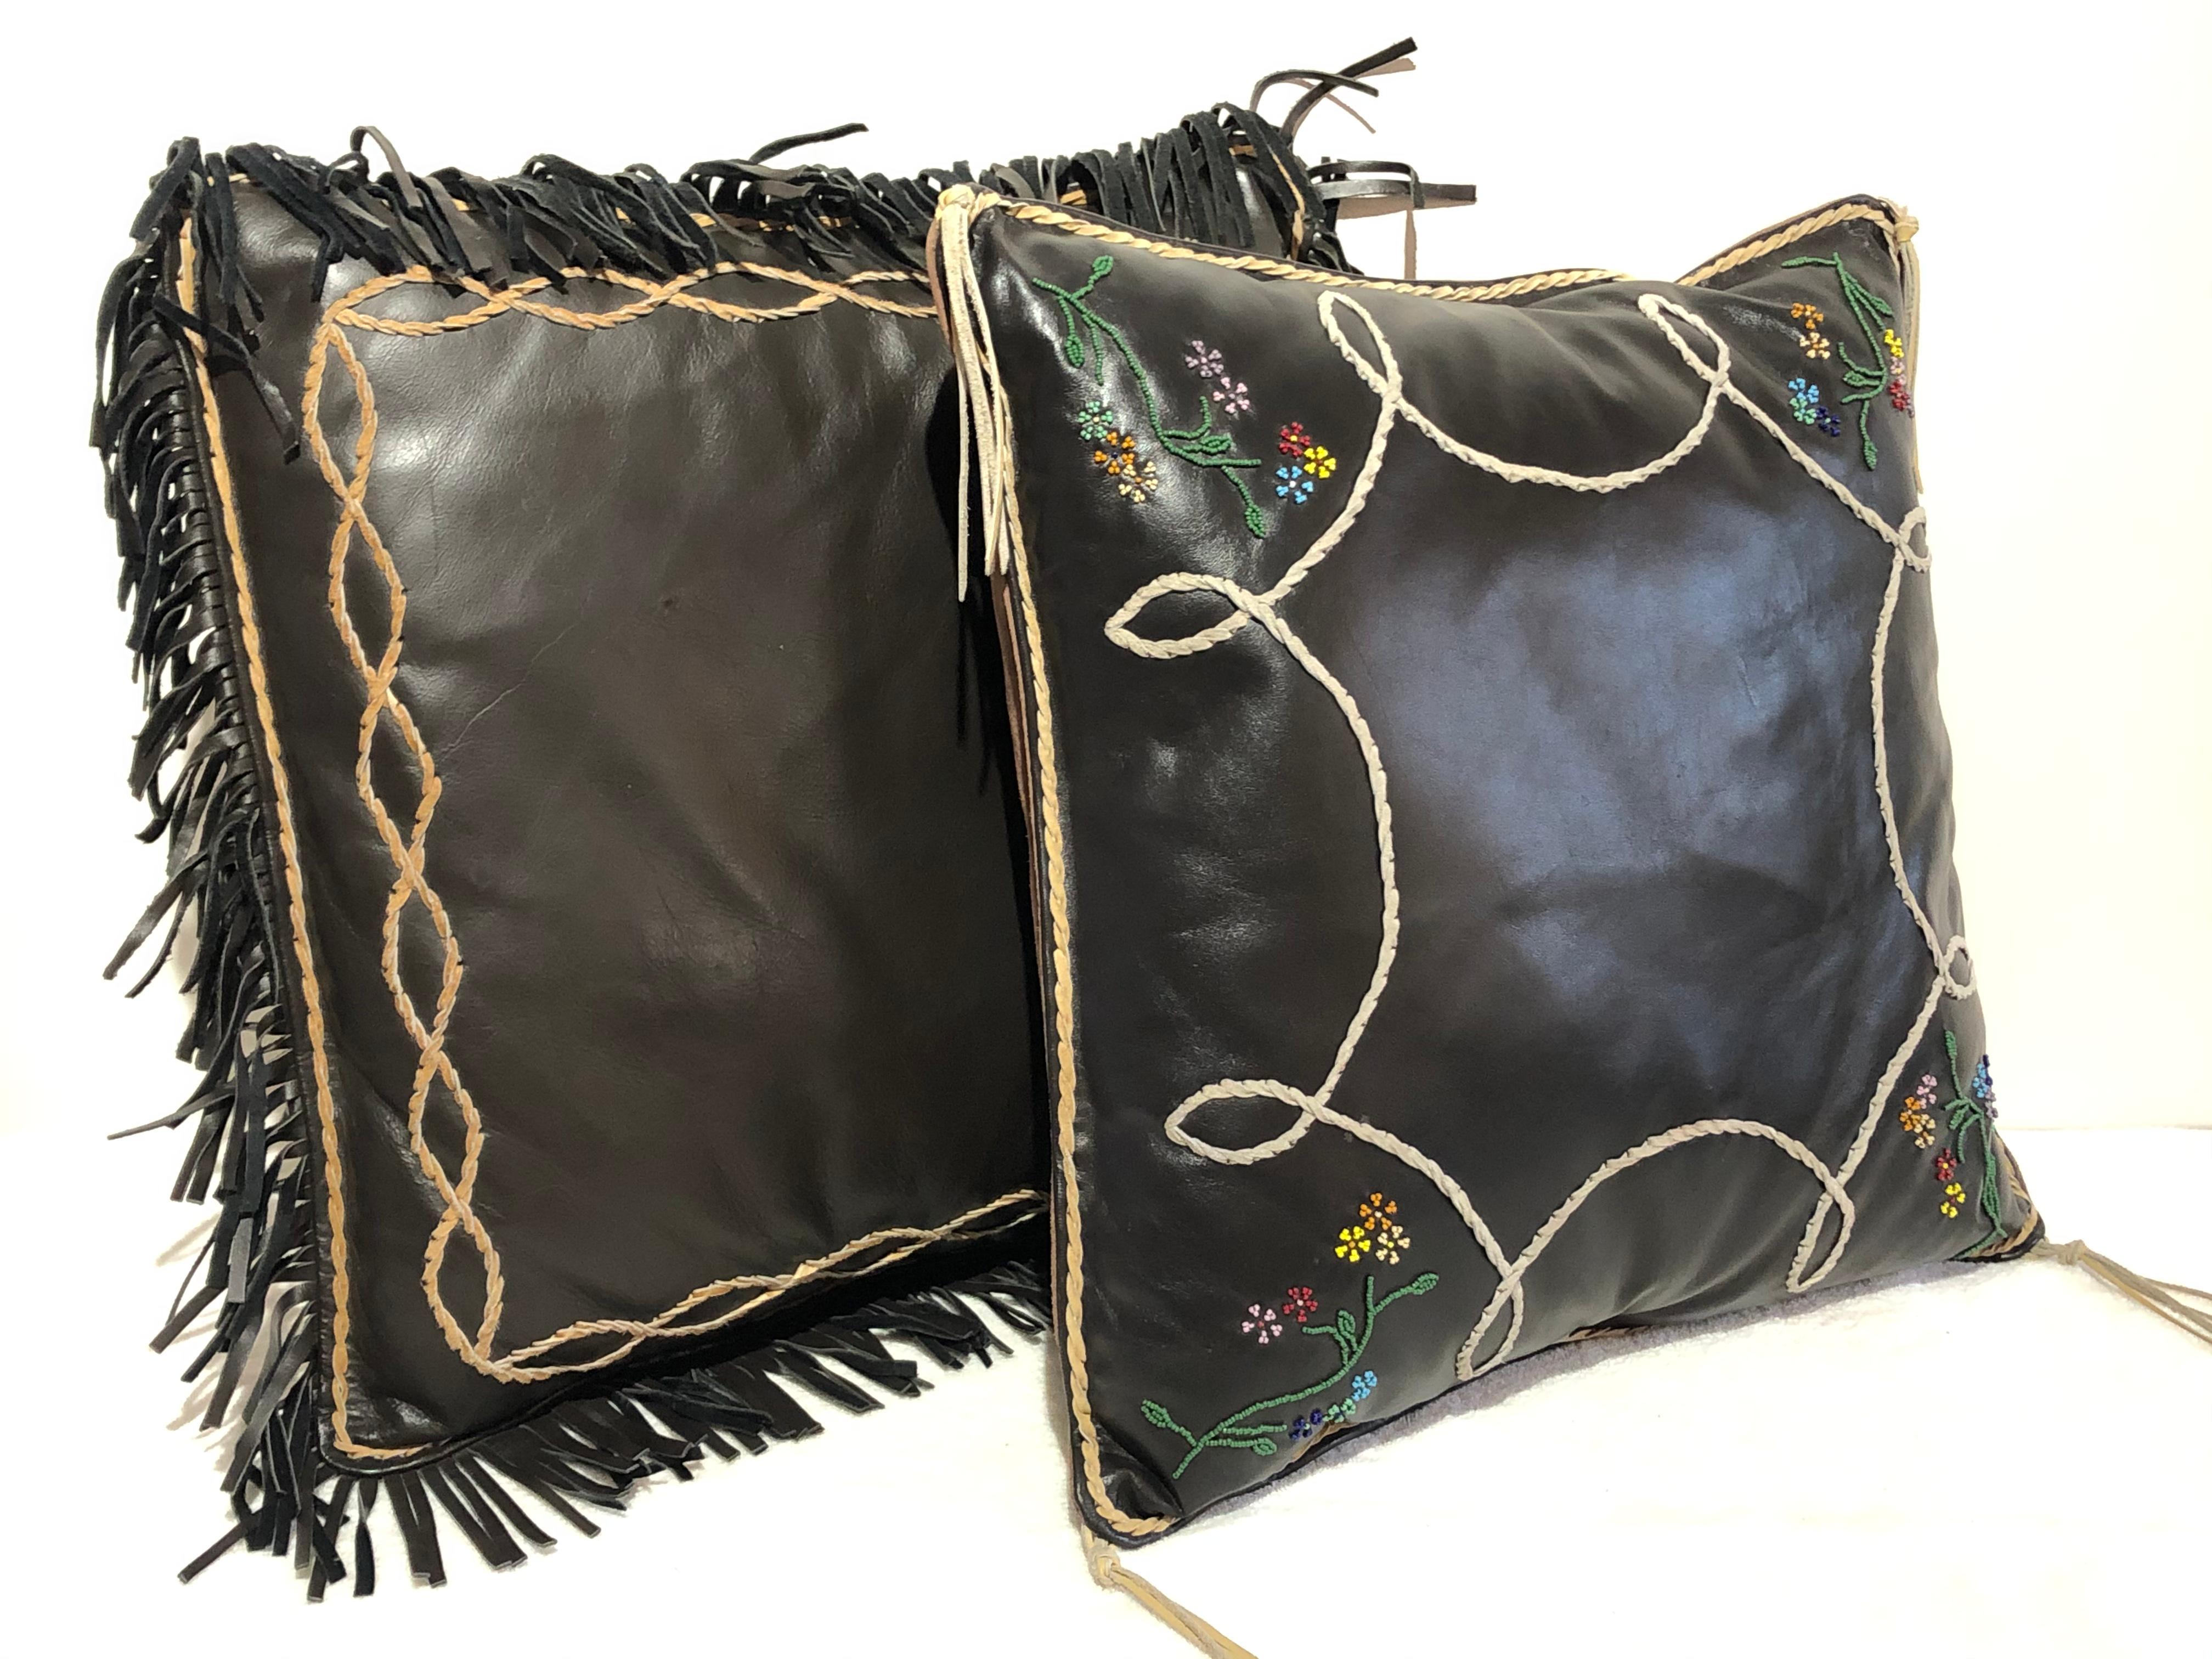 Two large leather handmade pillows, signed on the back label Robert Pina and name of pillow shown in photos, beaded, handwoven tooled suede and fringe border and corners. All signed and inscribed on leather label to back. Pictured in photo's, Heber